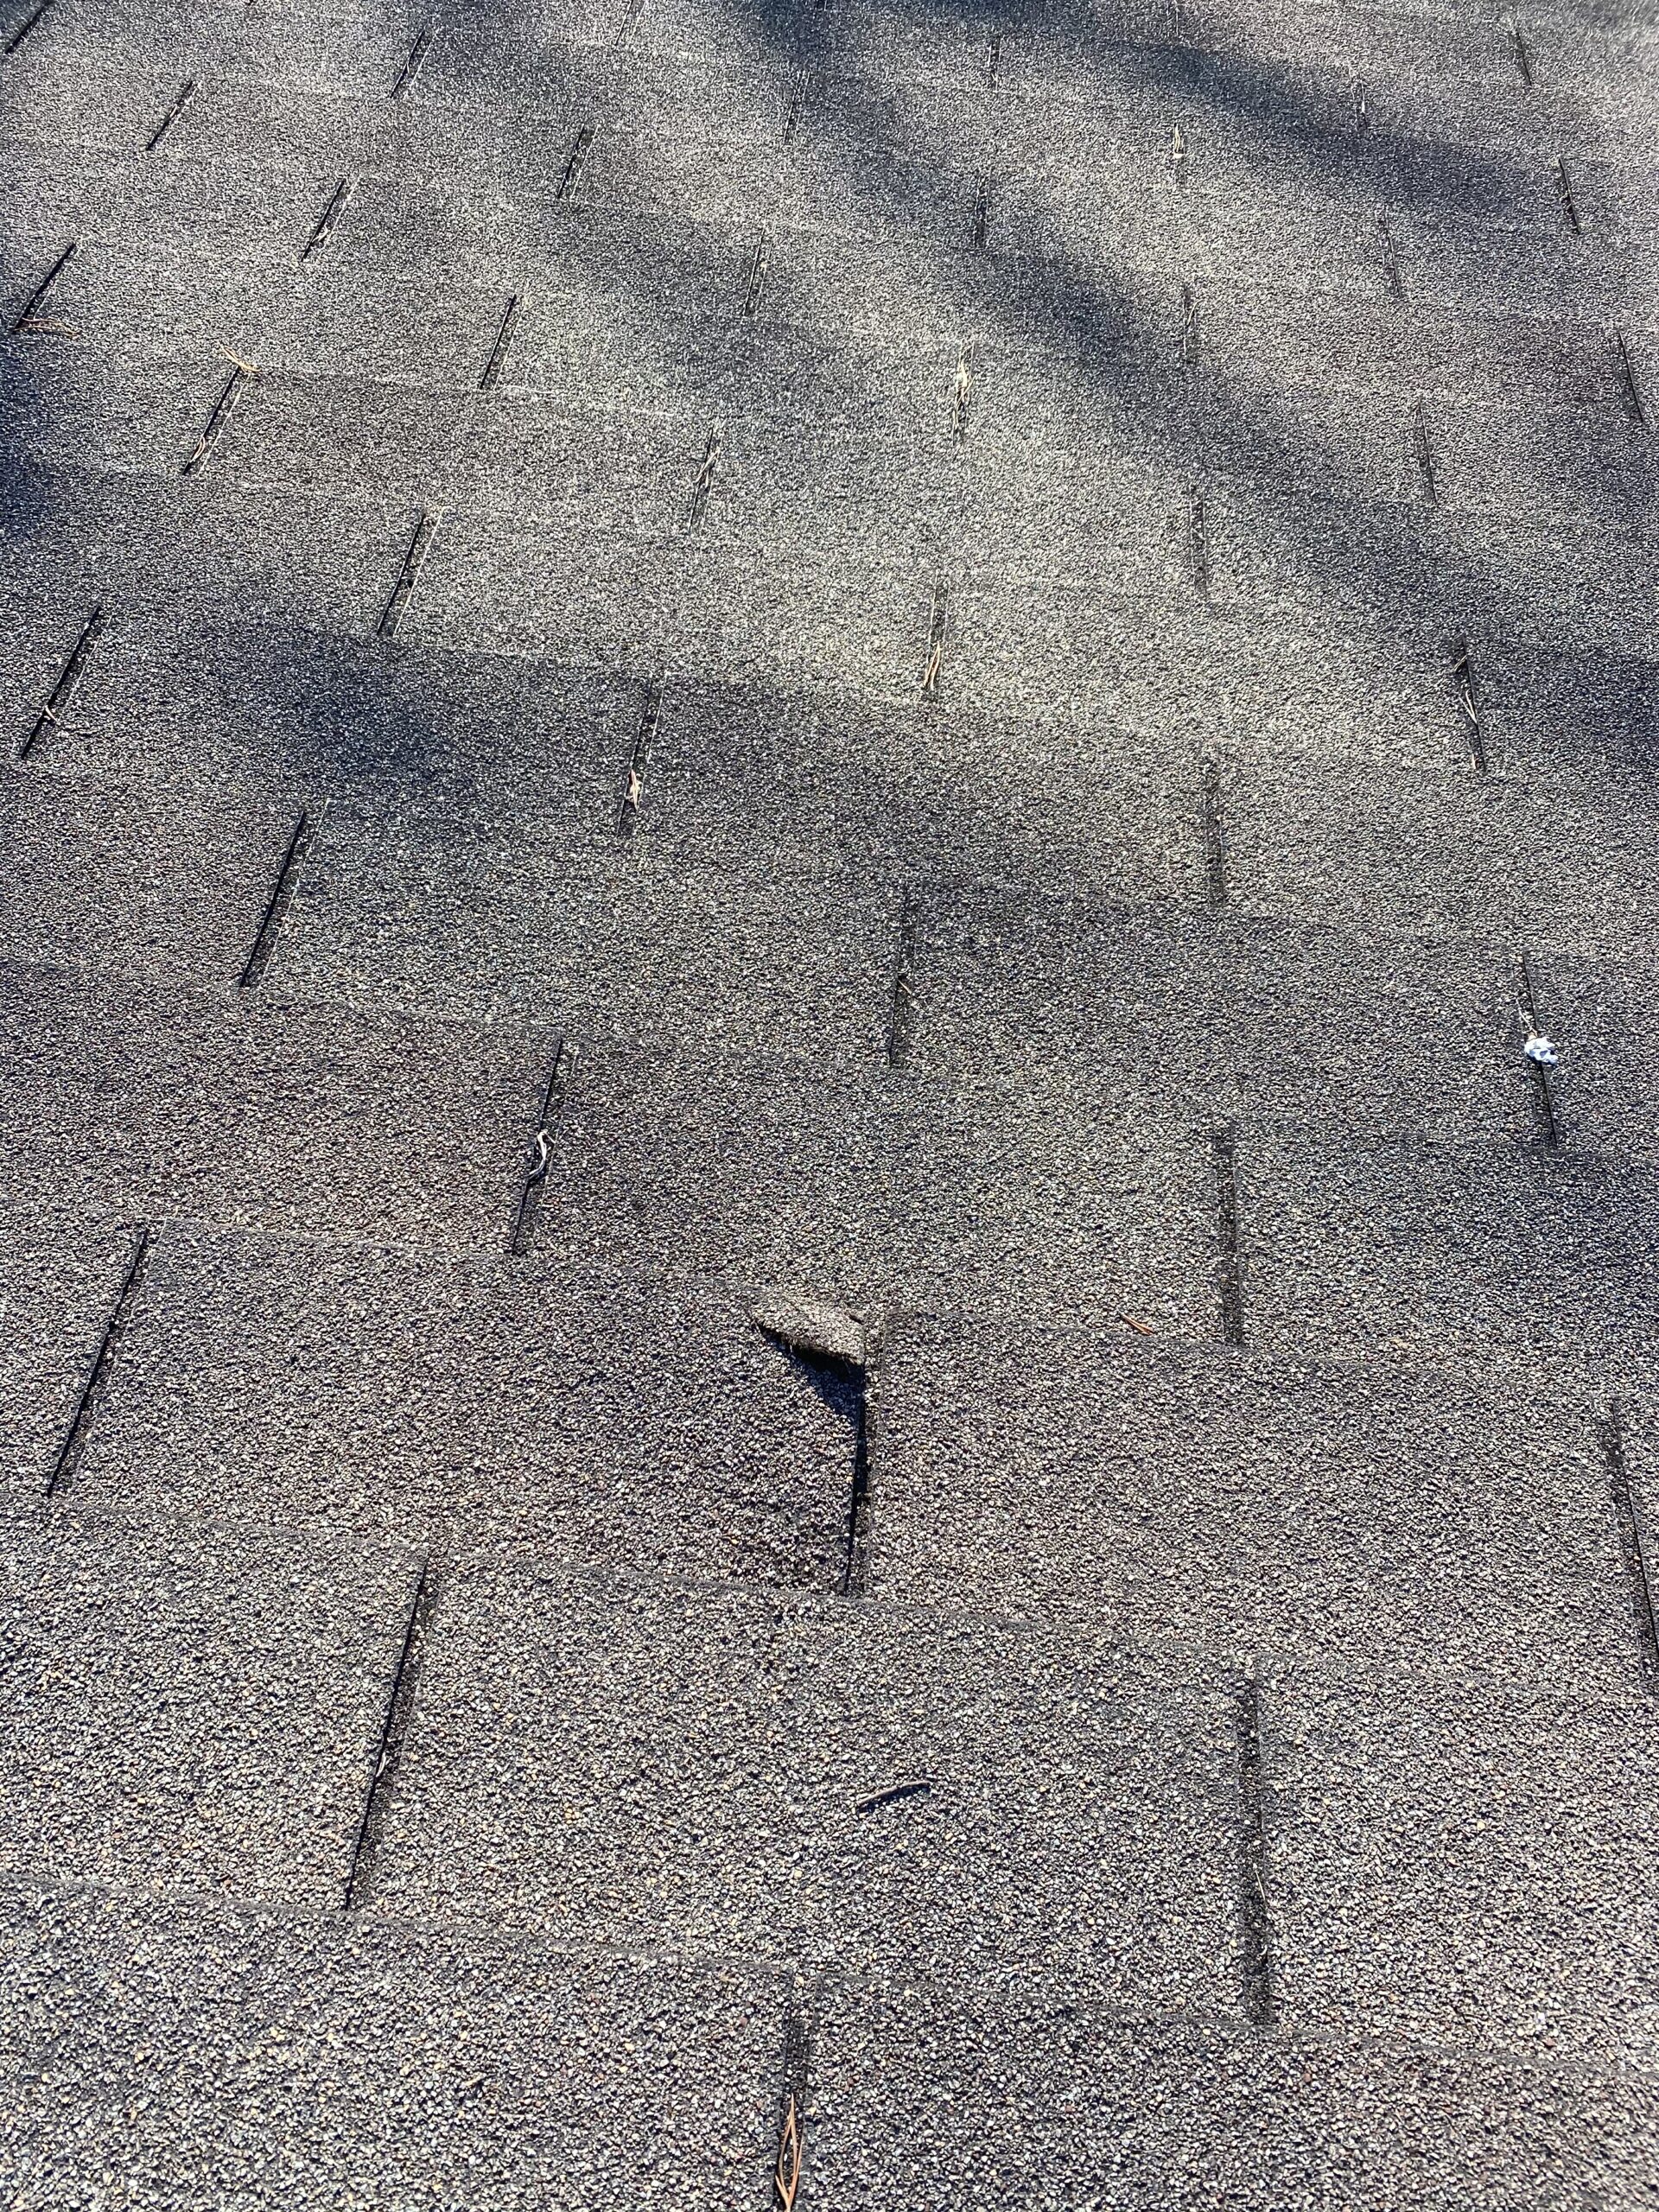 This is a picture of an old 3 tab shingle that has wind damage.